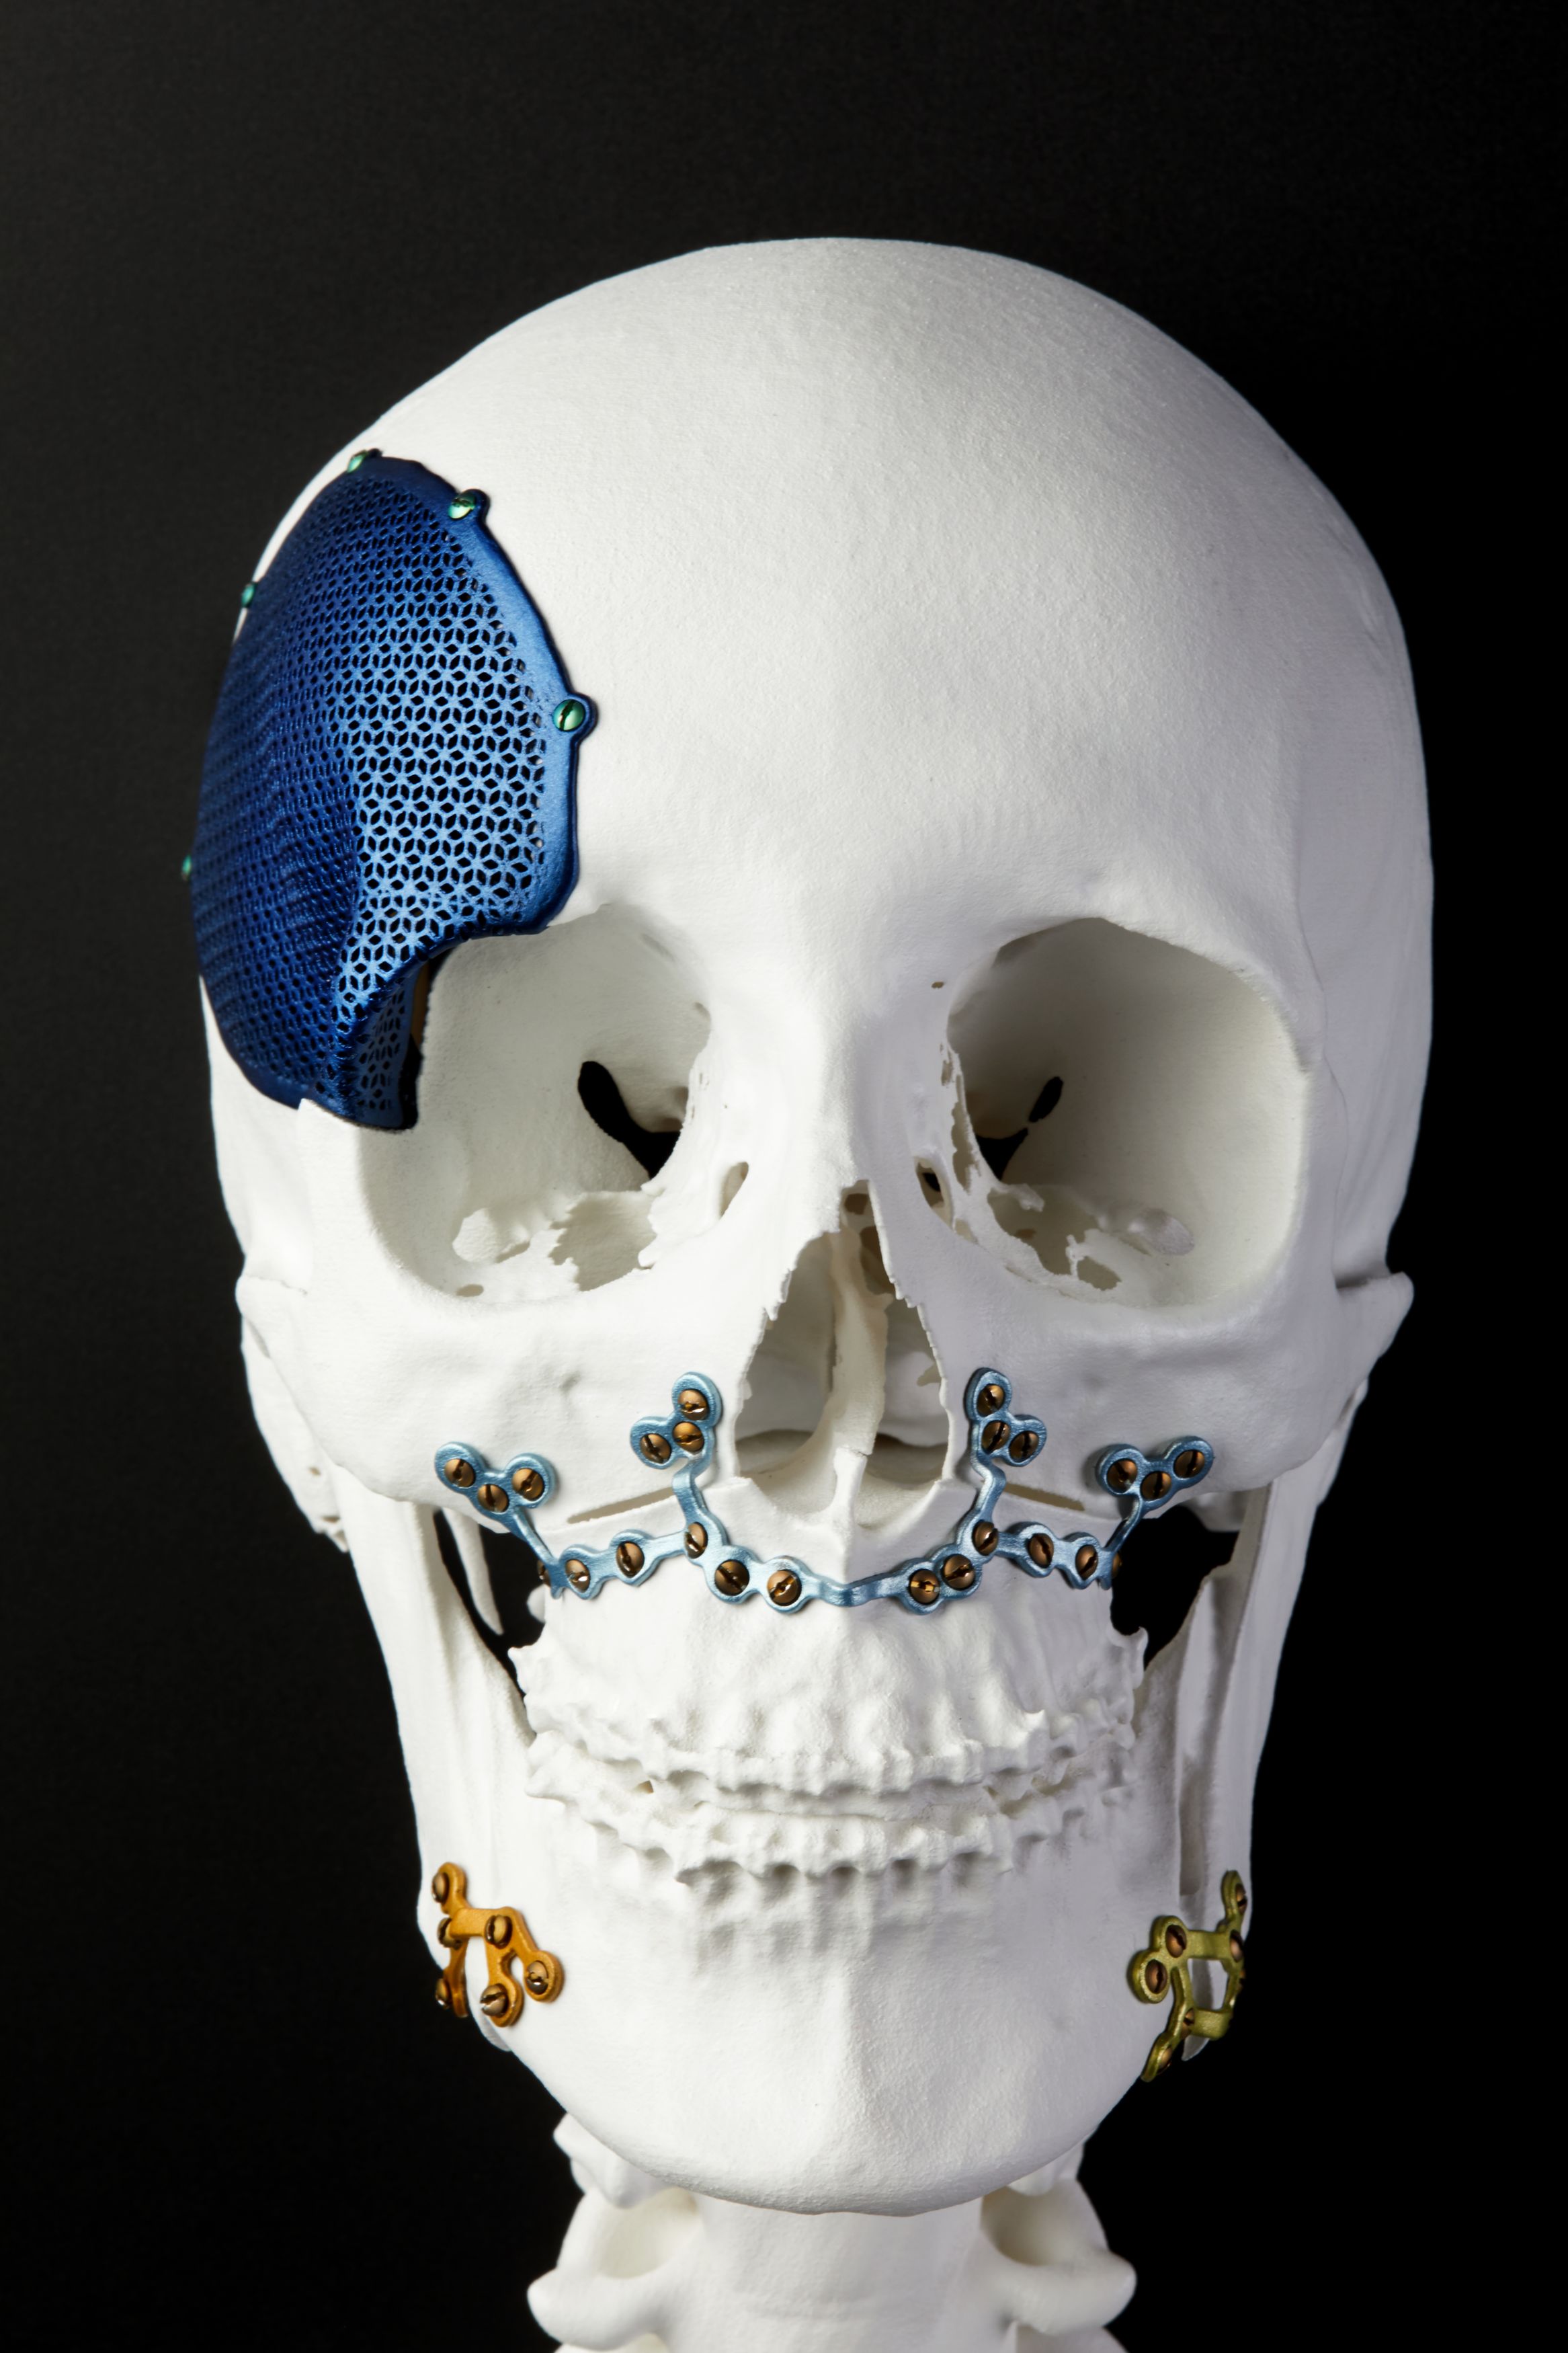 How 3D printing can help surgeons